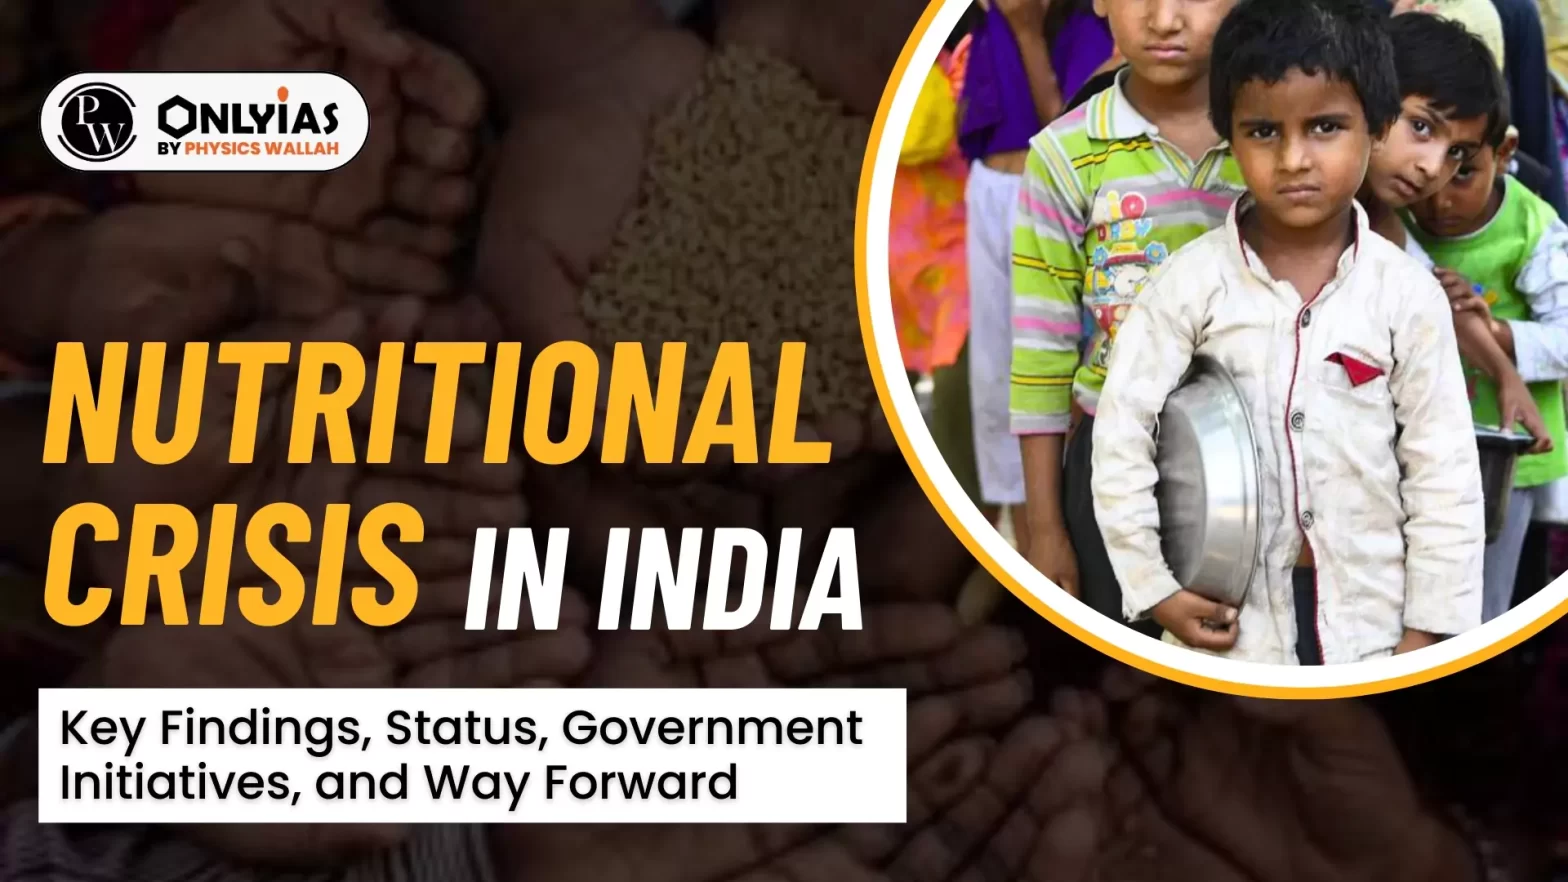 Nutritional Crisis in India: Key Findings, Status, Government Initiatives, and Way Forward